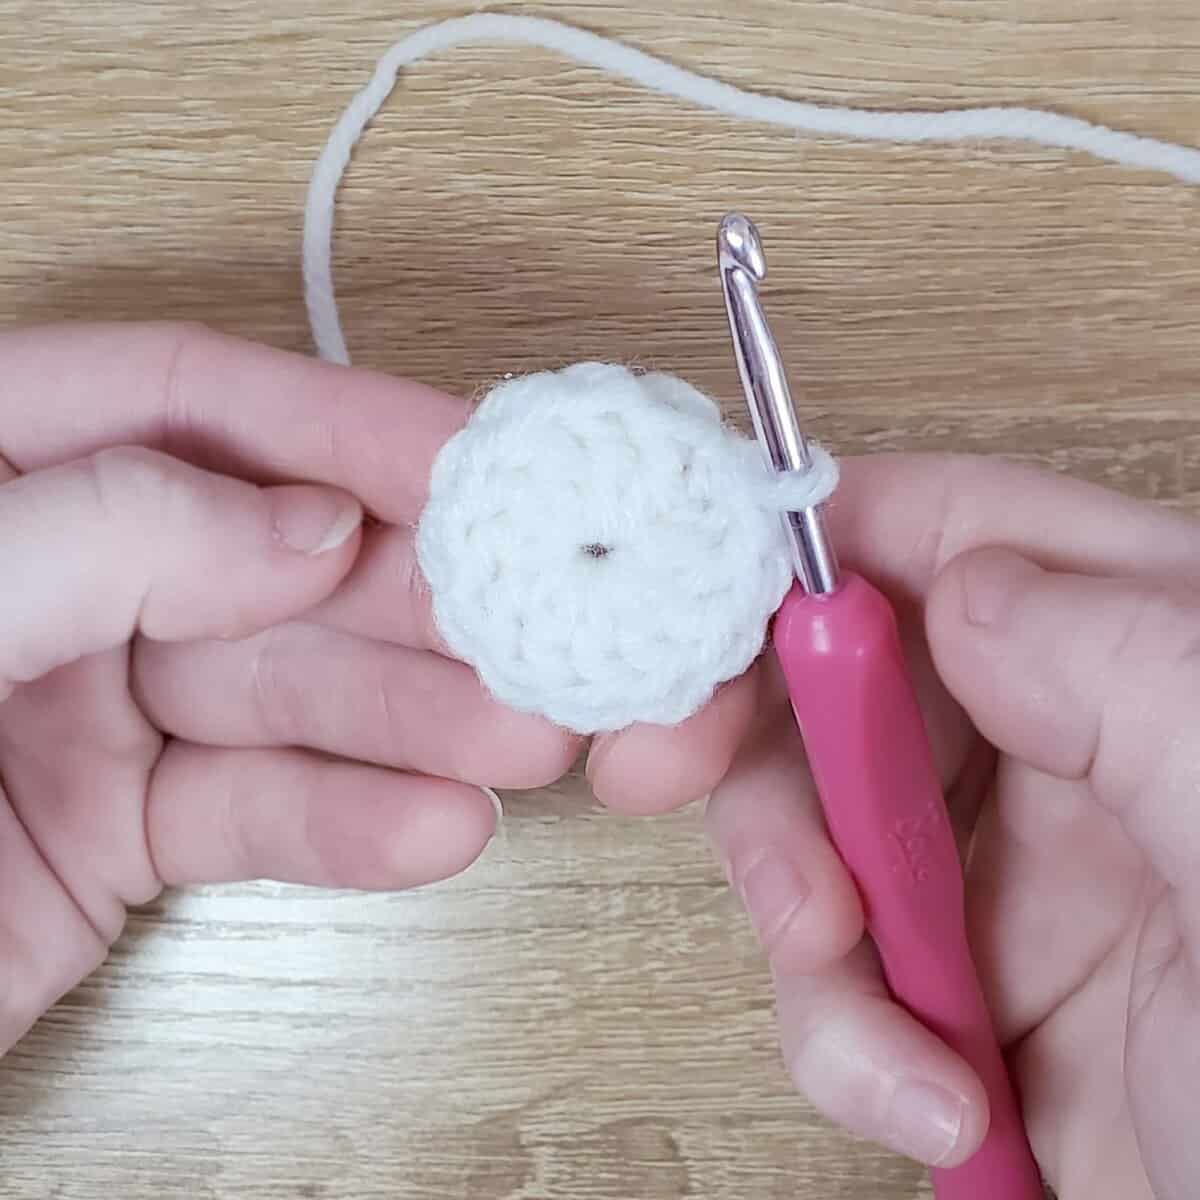 Magic Loop with 12 double crochet stitches